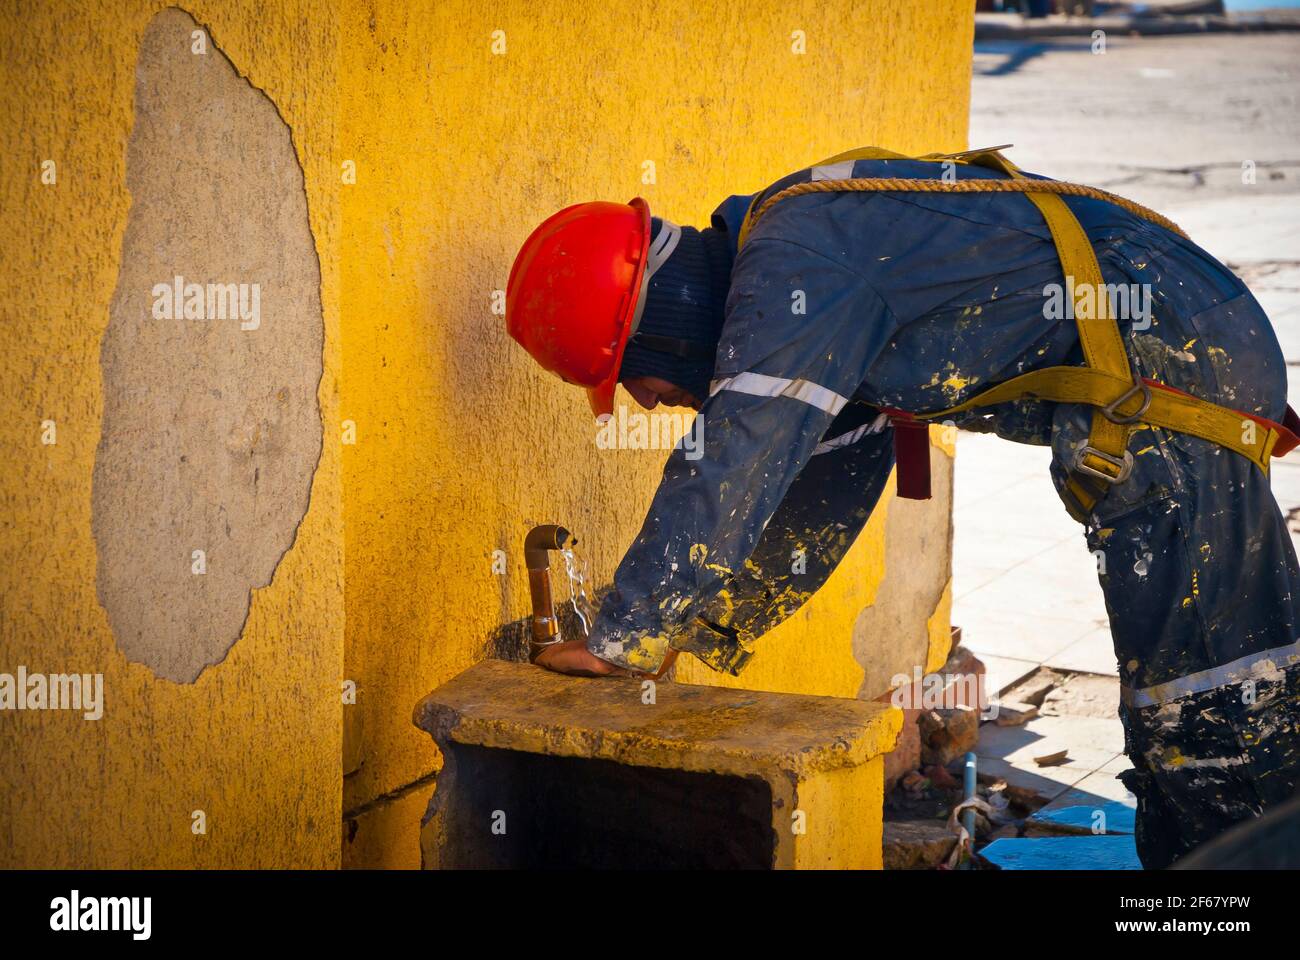 TALCAHUANO, CHILE - APRIL 21, 2010: Worker drinking water Stock Photo